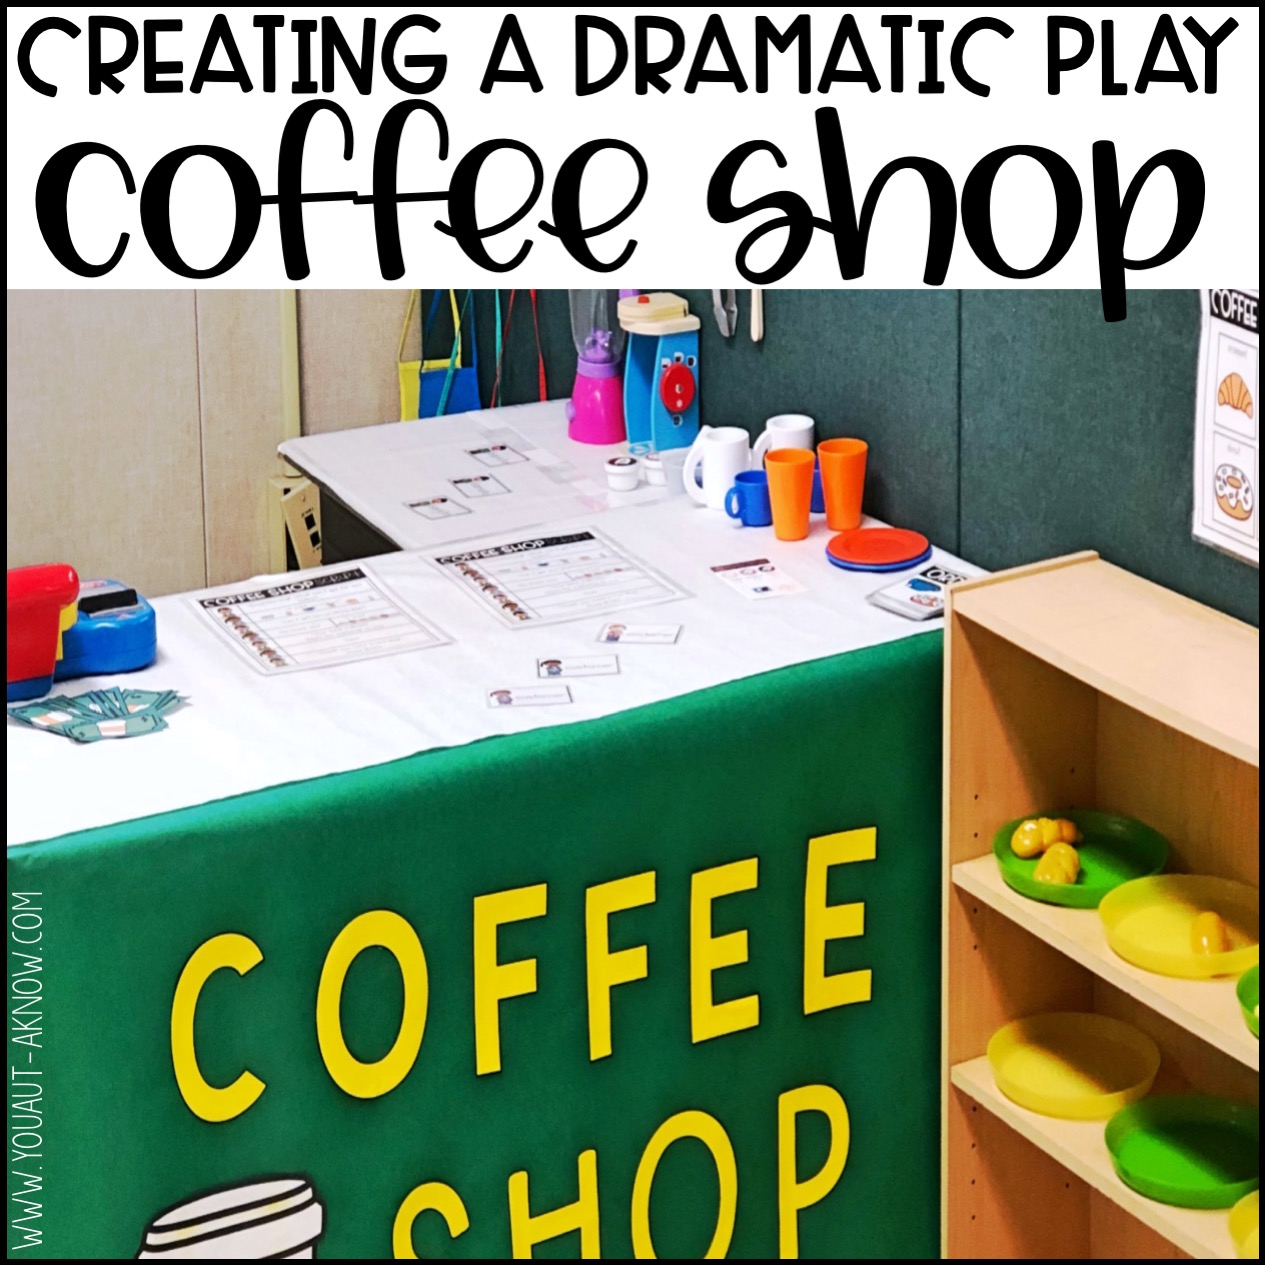 https://youaut-aknow.com/wp-content/uploads/2019/04/Dramatic2BPlay2BCoffee2BShop2Bfor2BSpecial2BEducation.jpg